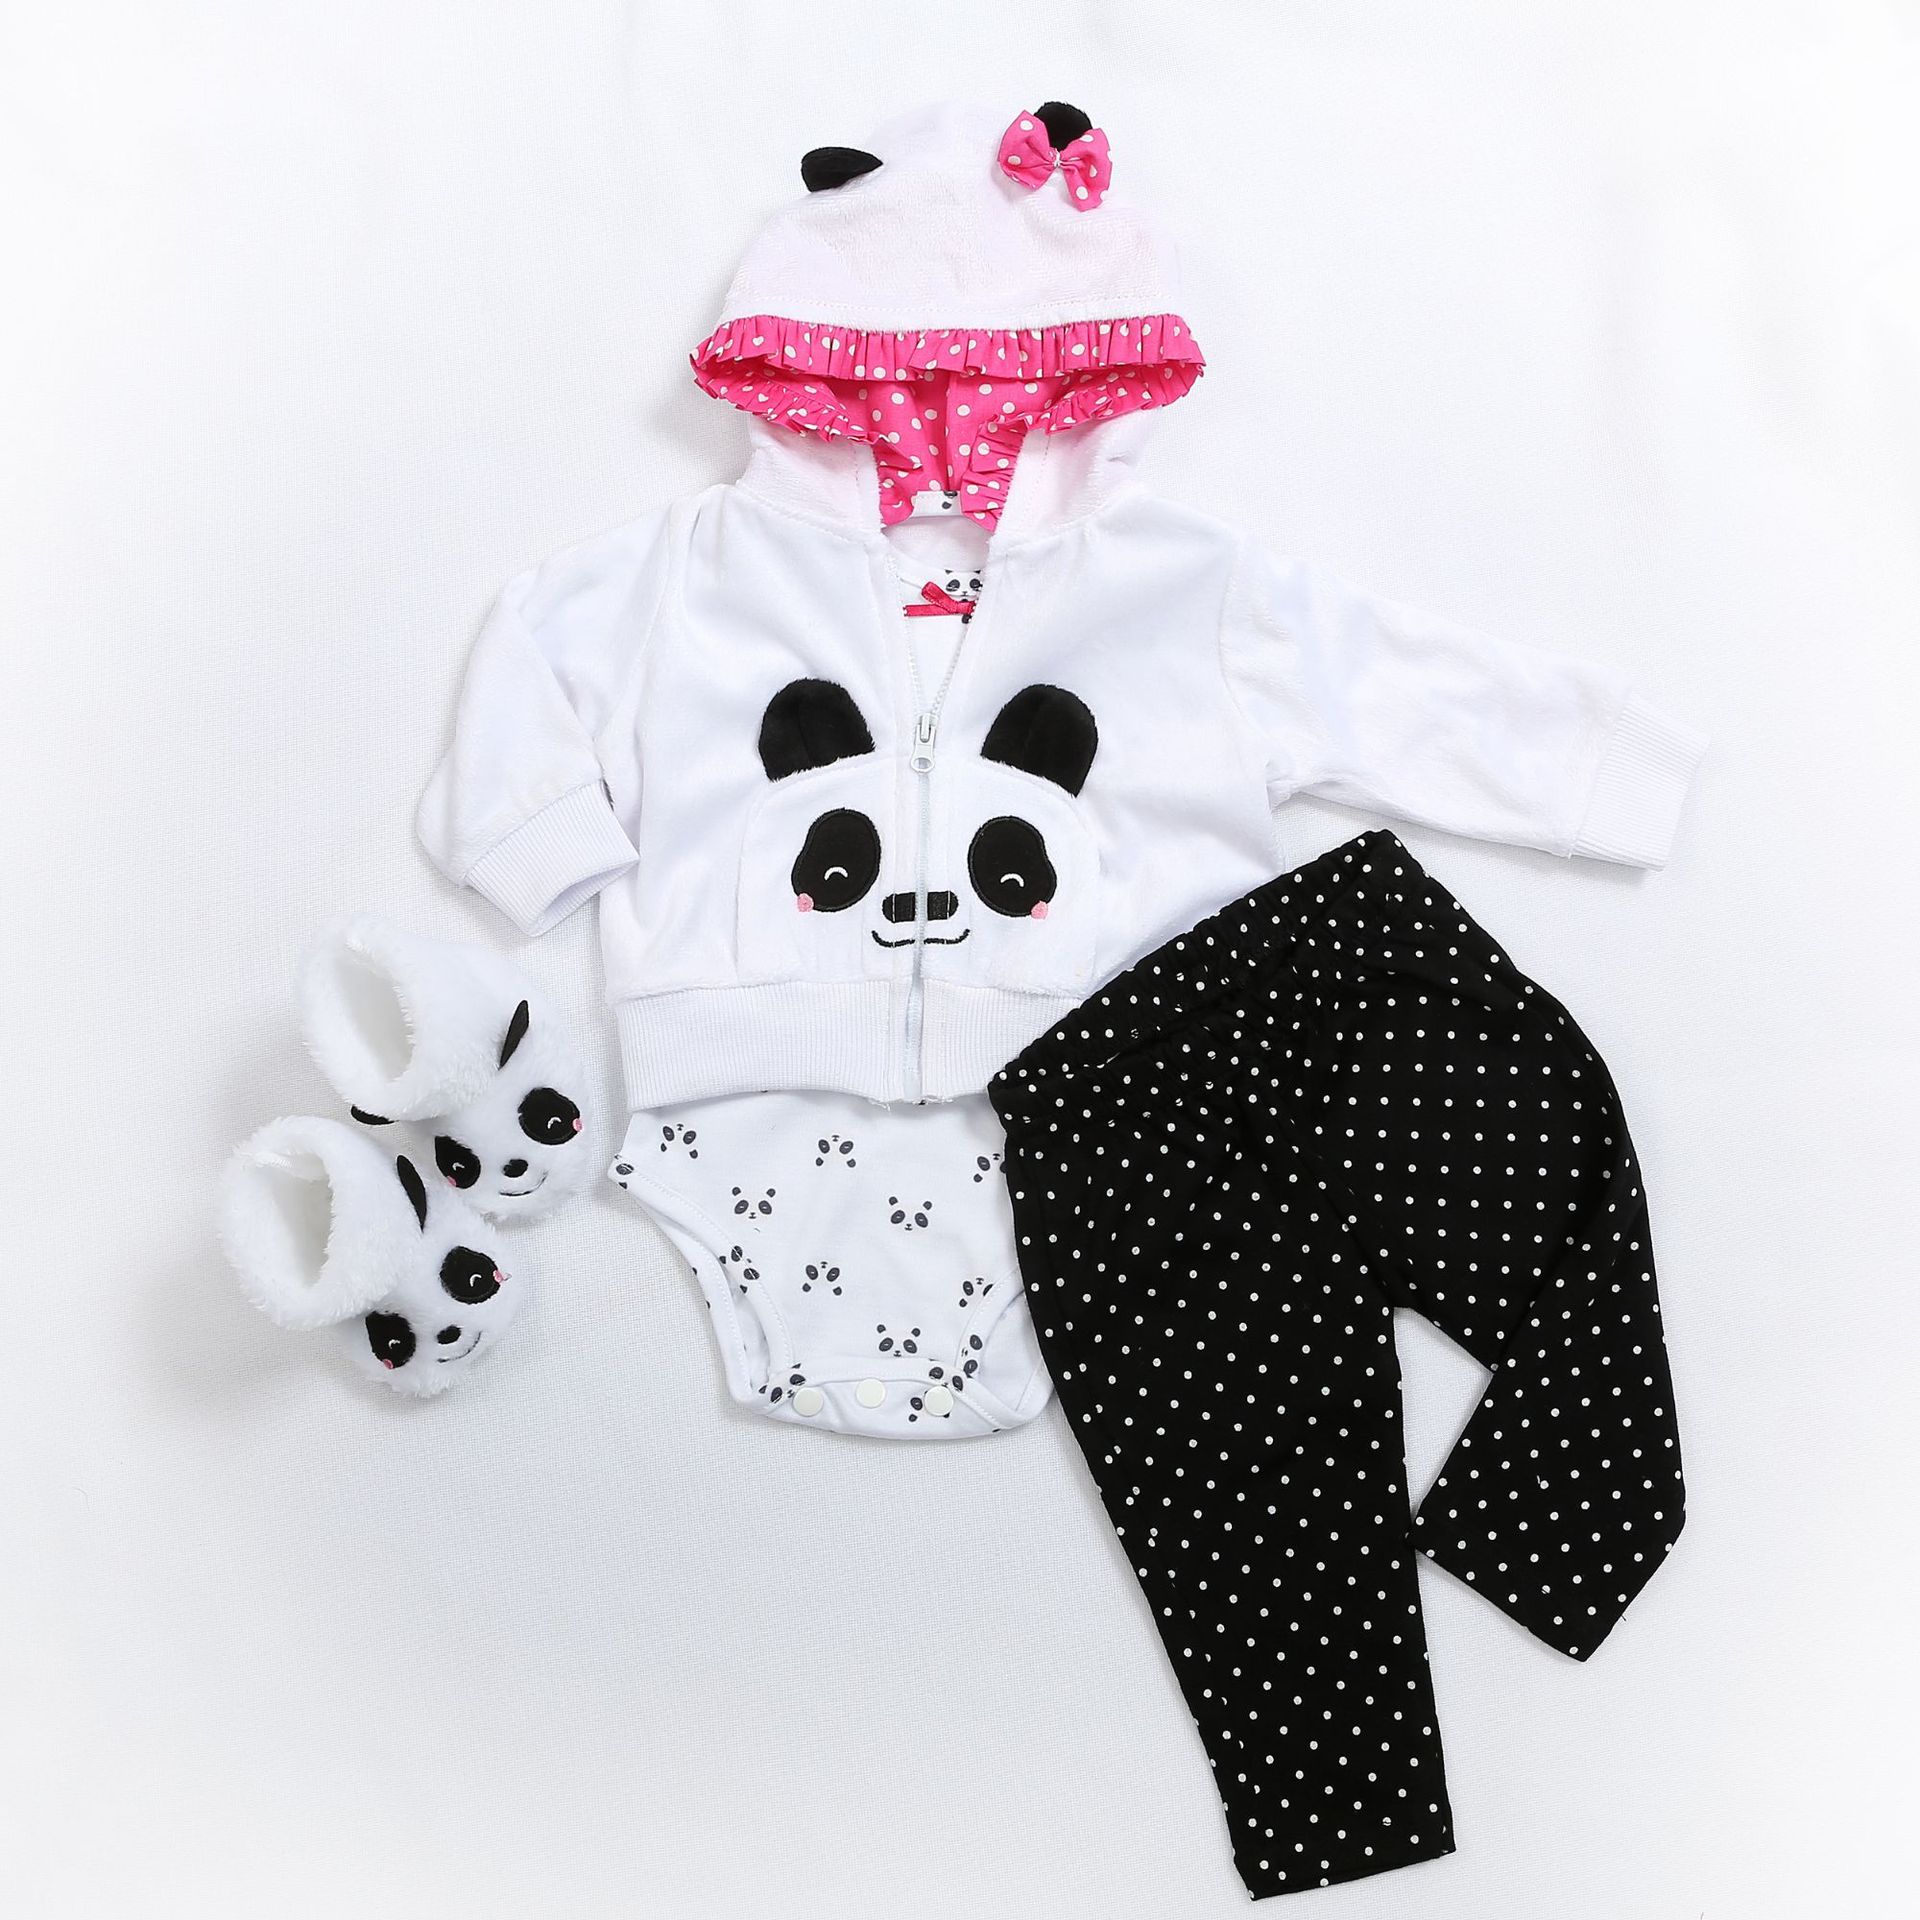 Reborn Baby Doll Clothes High Quality Dress All Cotton Clothes Fit for 48cm 60cm Baby Doll